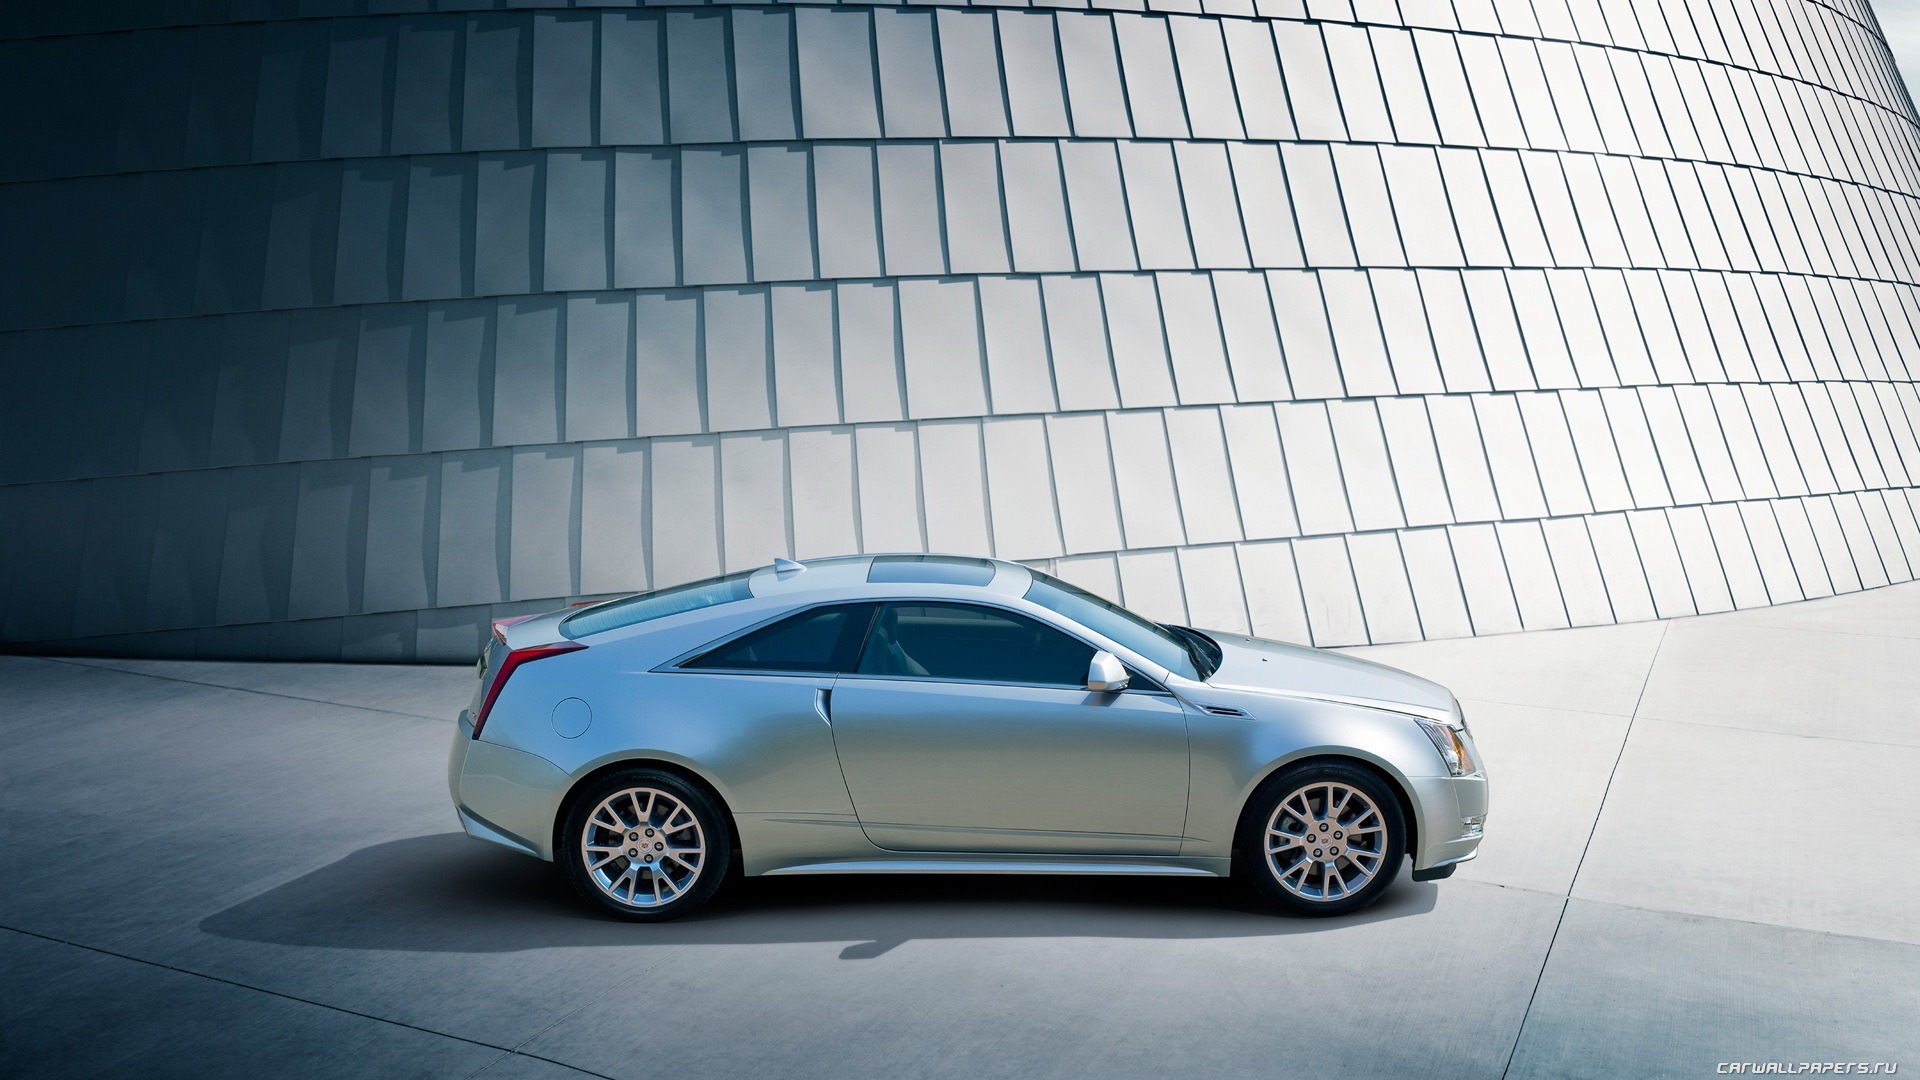 Cadillac CTS Coupe - 2011 HD wallpaper #2 - 1920x1080